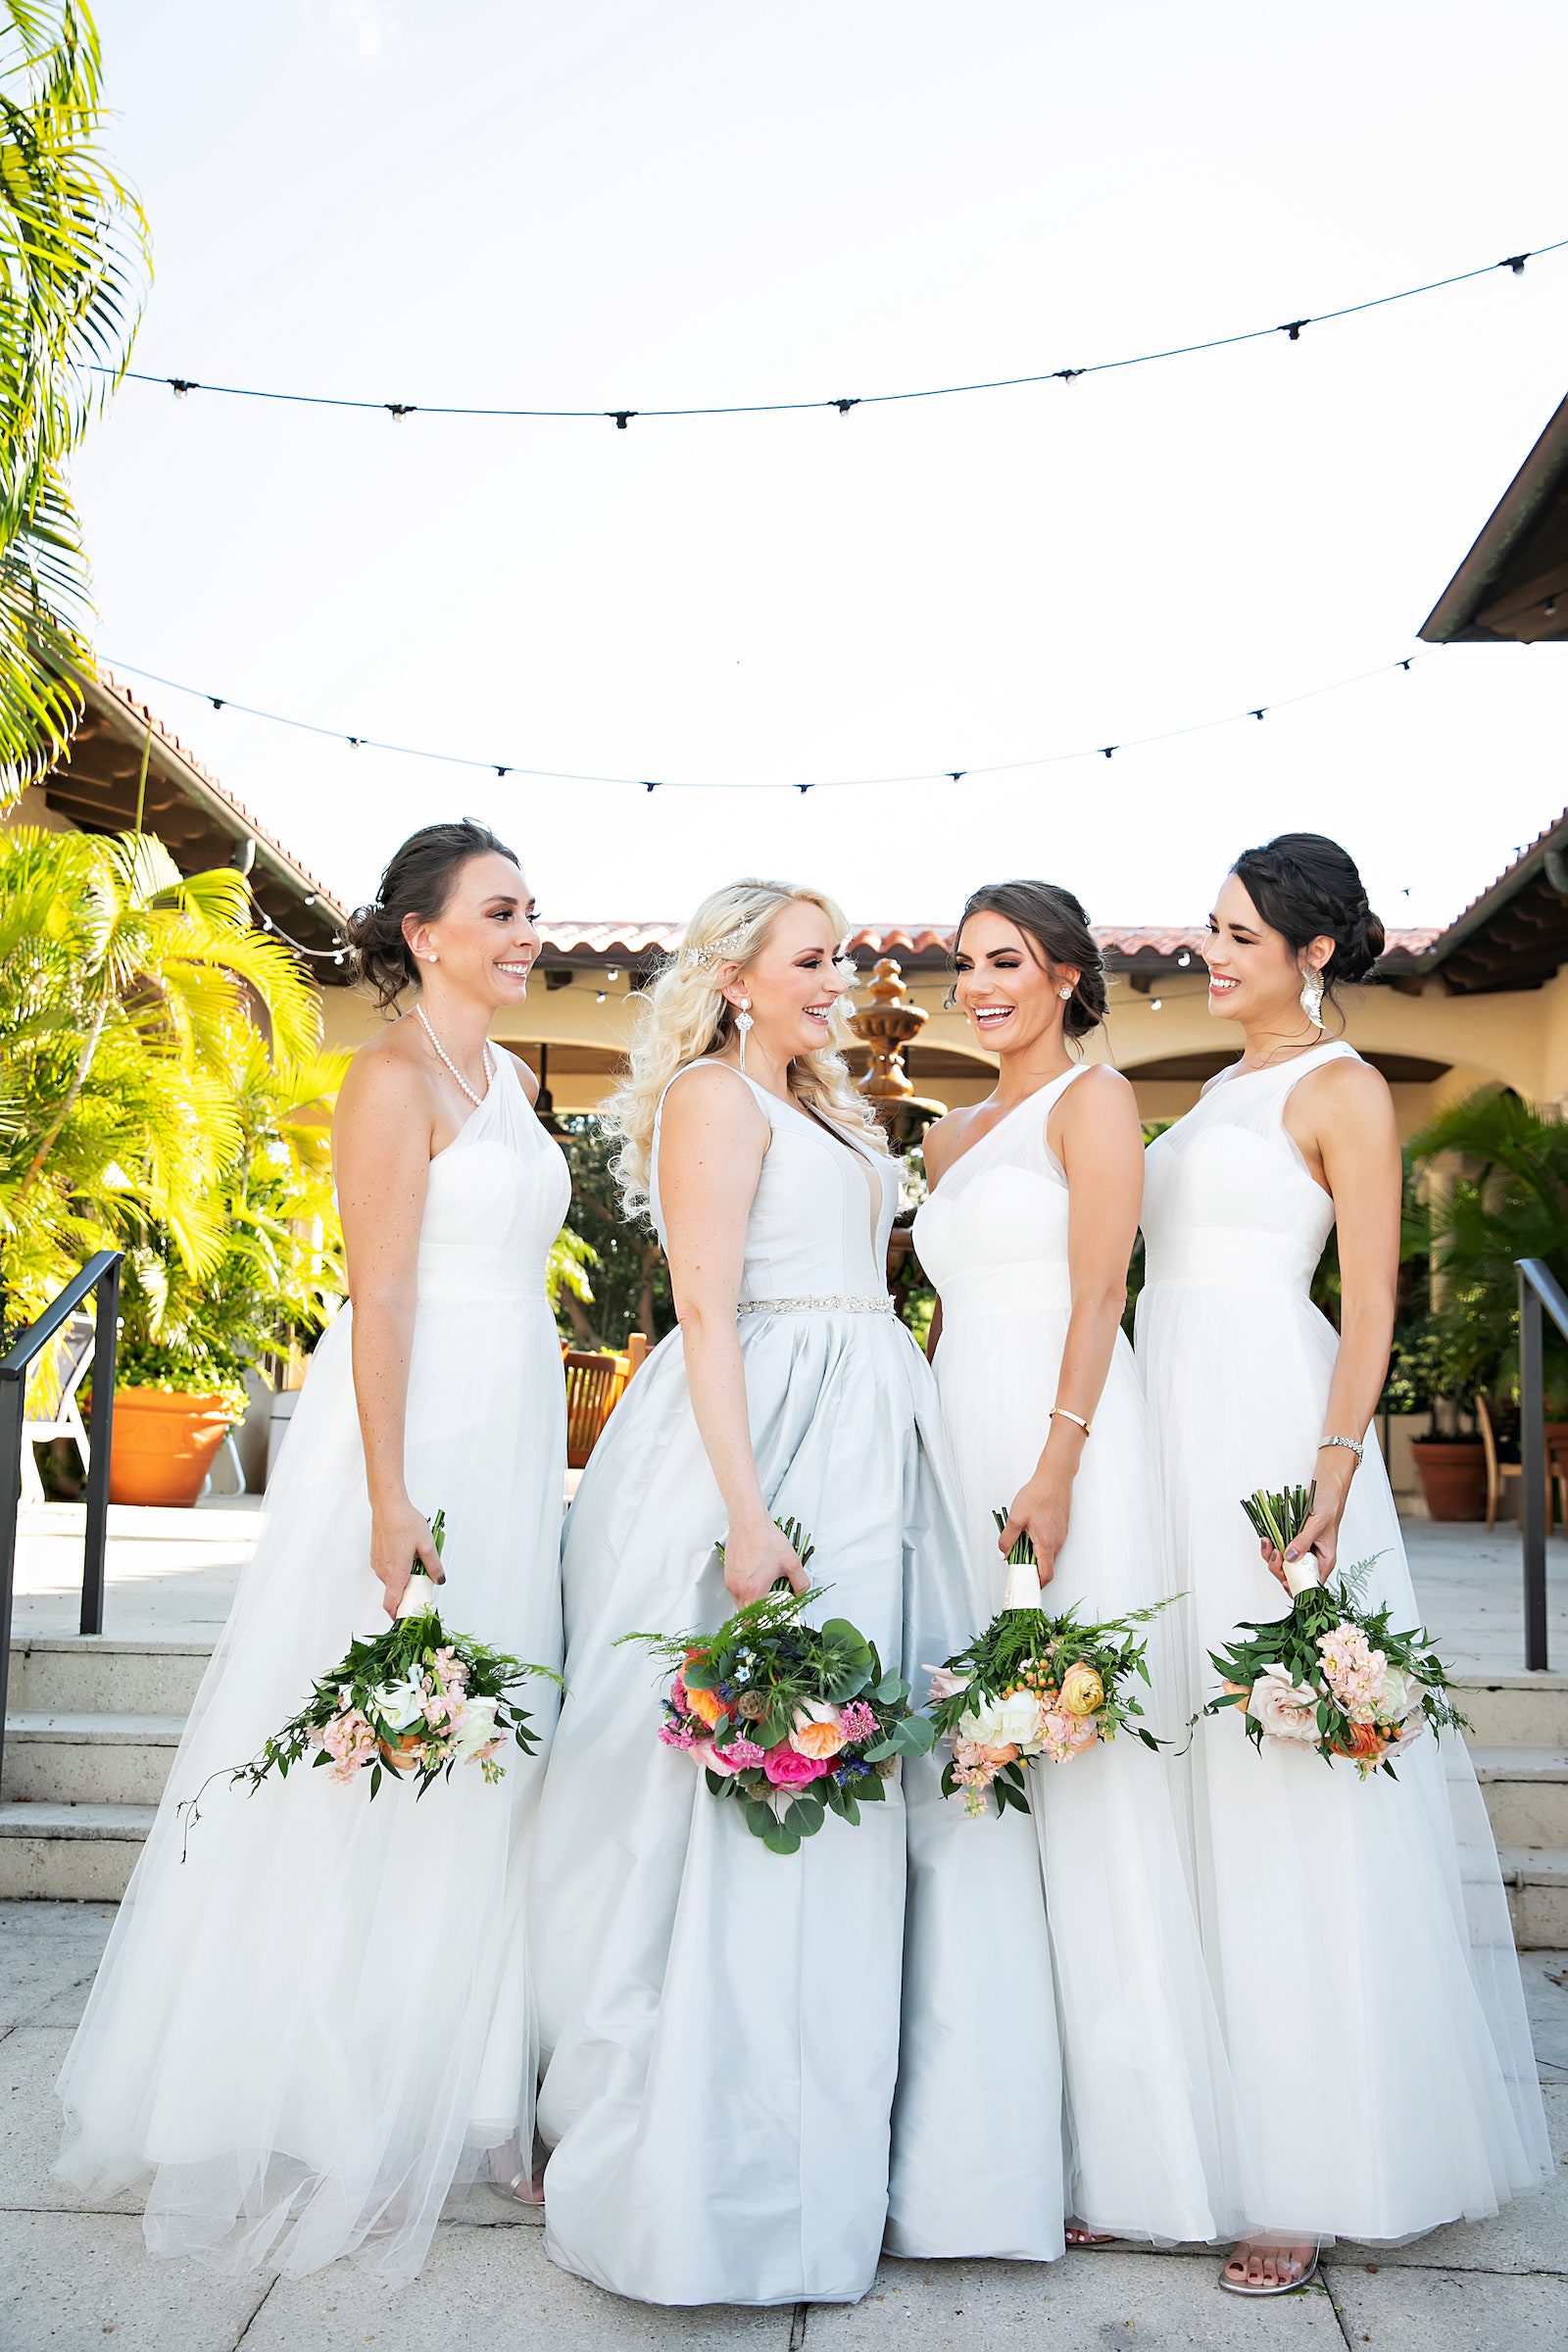 Bride and Bridesmaids in White Floor Length Bridesmaids Dresses Wedding Portrait with Bright Orange and Pink Floral Bouquets | Tampa Florida Photographer Limelight Photography | The Resort at Longboat Key Club